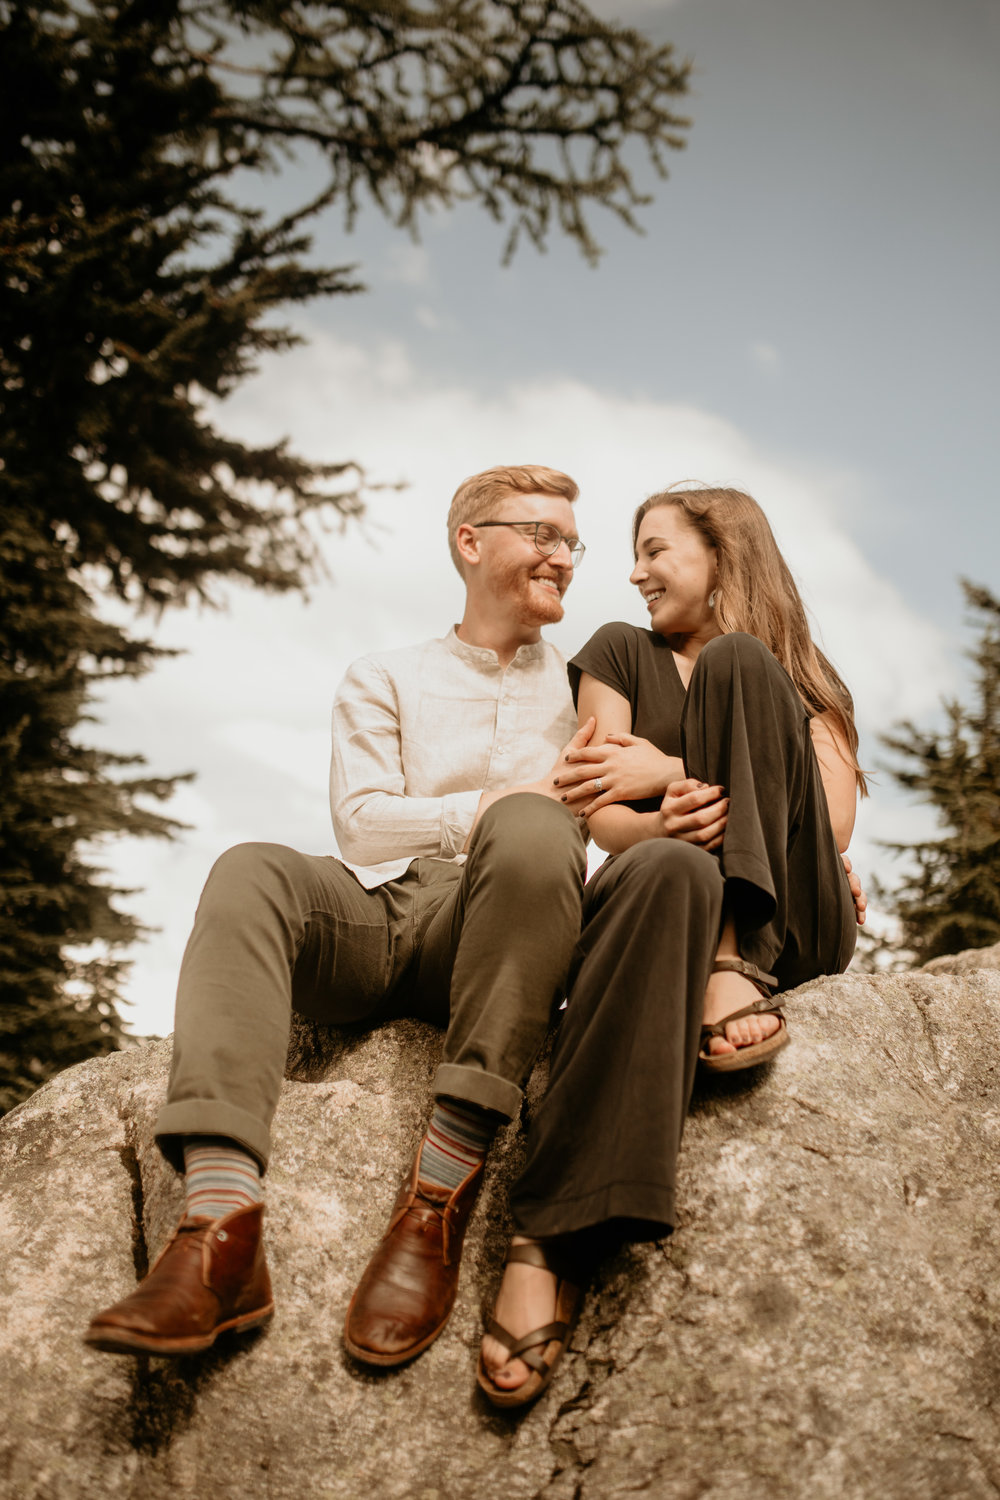 Diablo lake engagement photos -Ross lake engagement photos - Seattle elopement photographer - north cascades hike - best hike north cascades - best engagement photo location - what to wear to your engagement photos - best pnw elopement photographer